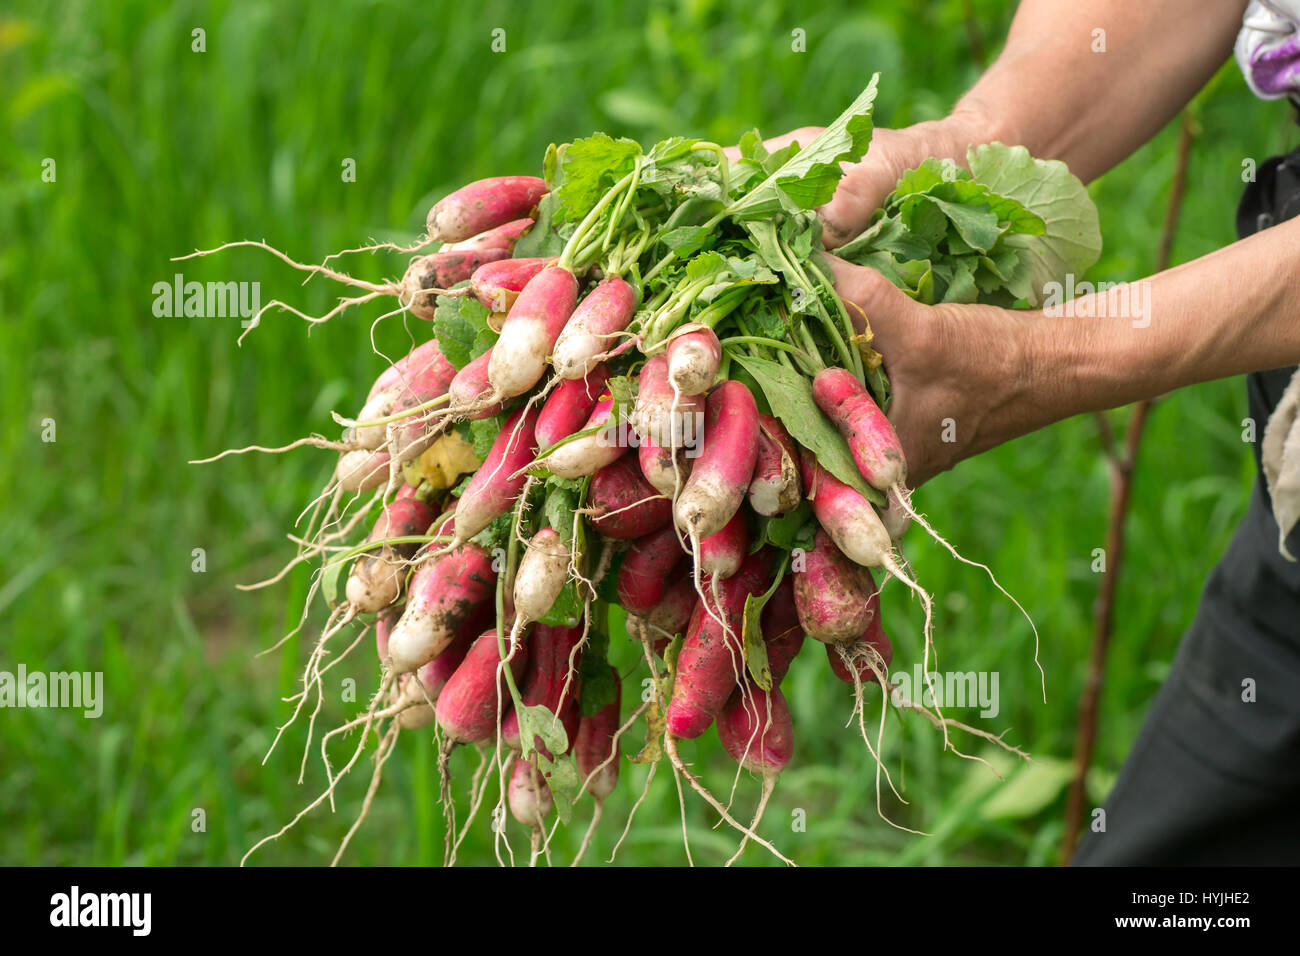 Radish in hand. Hands gardener. Work-worn hands. Farmers hands with freshly radish. Freshly picked vegetables. Unwashed radishes with tops. Stock Photo